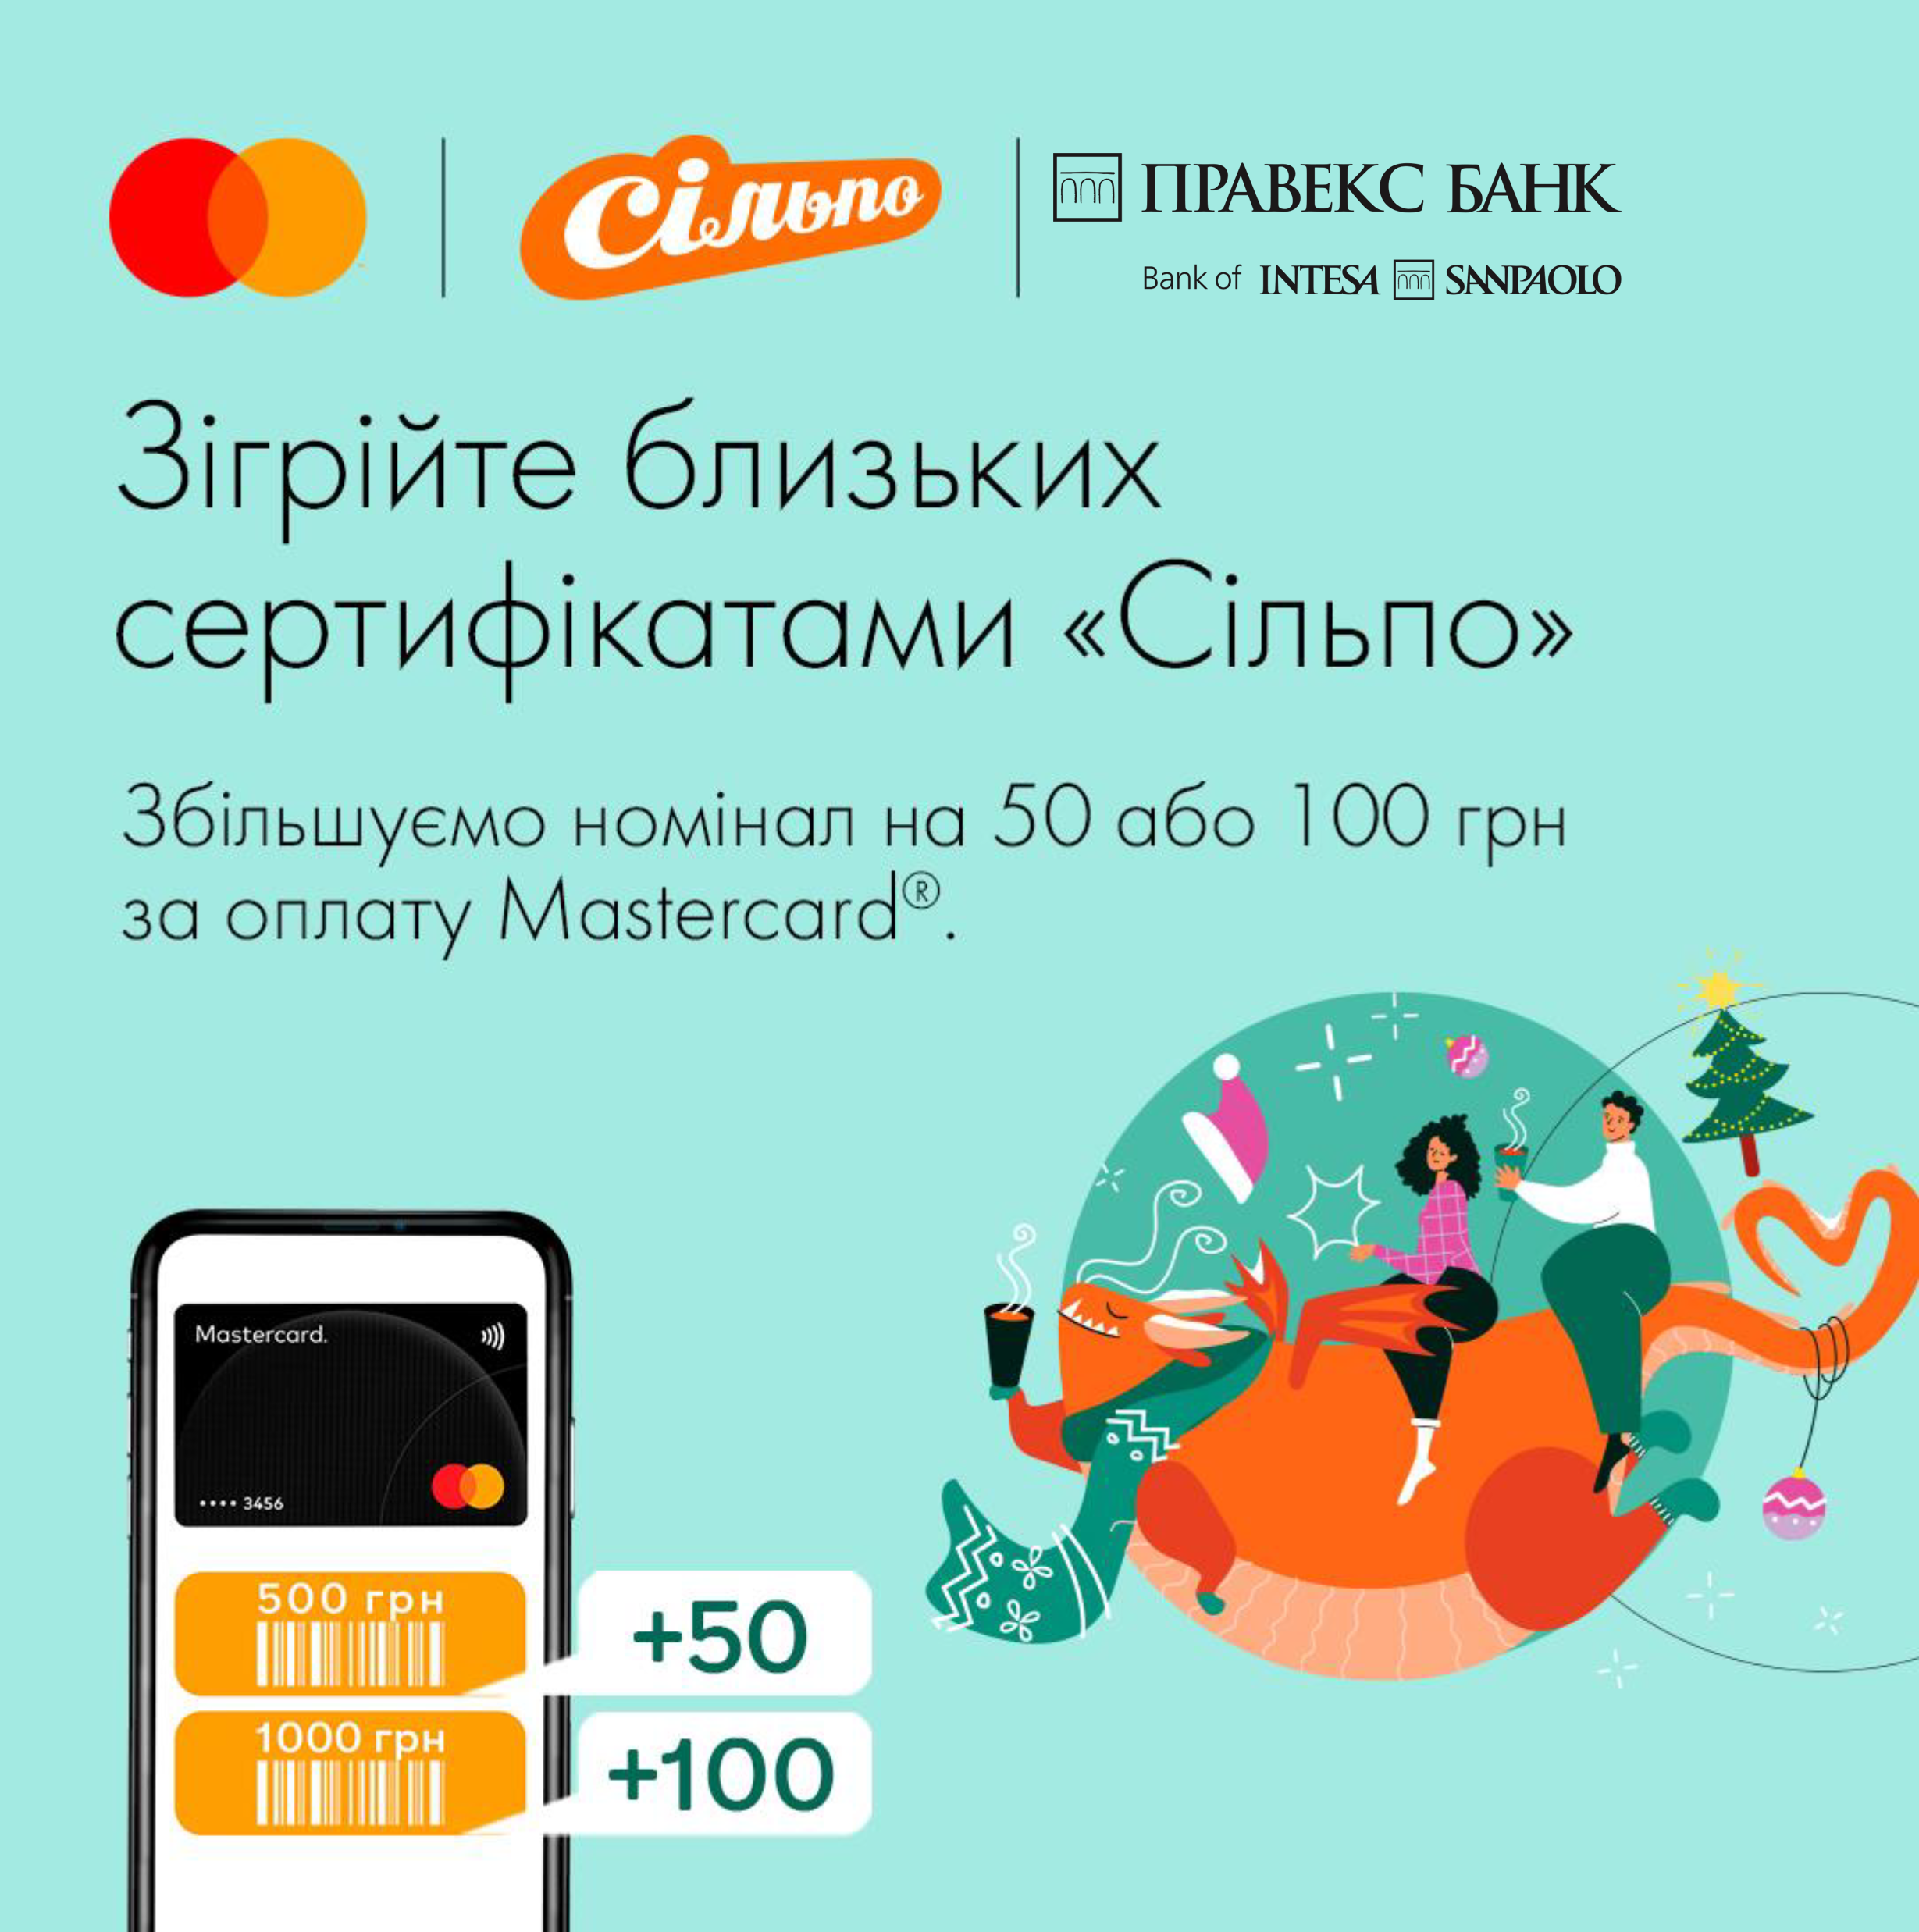 Special offer from Mastercard and \